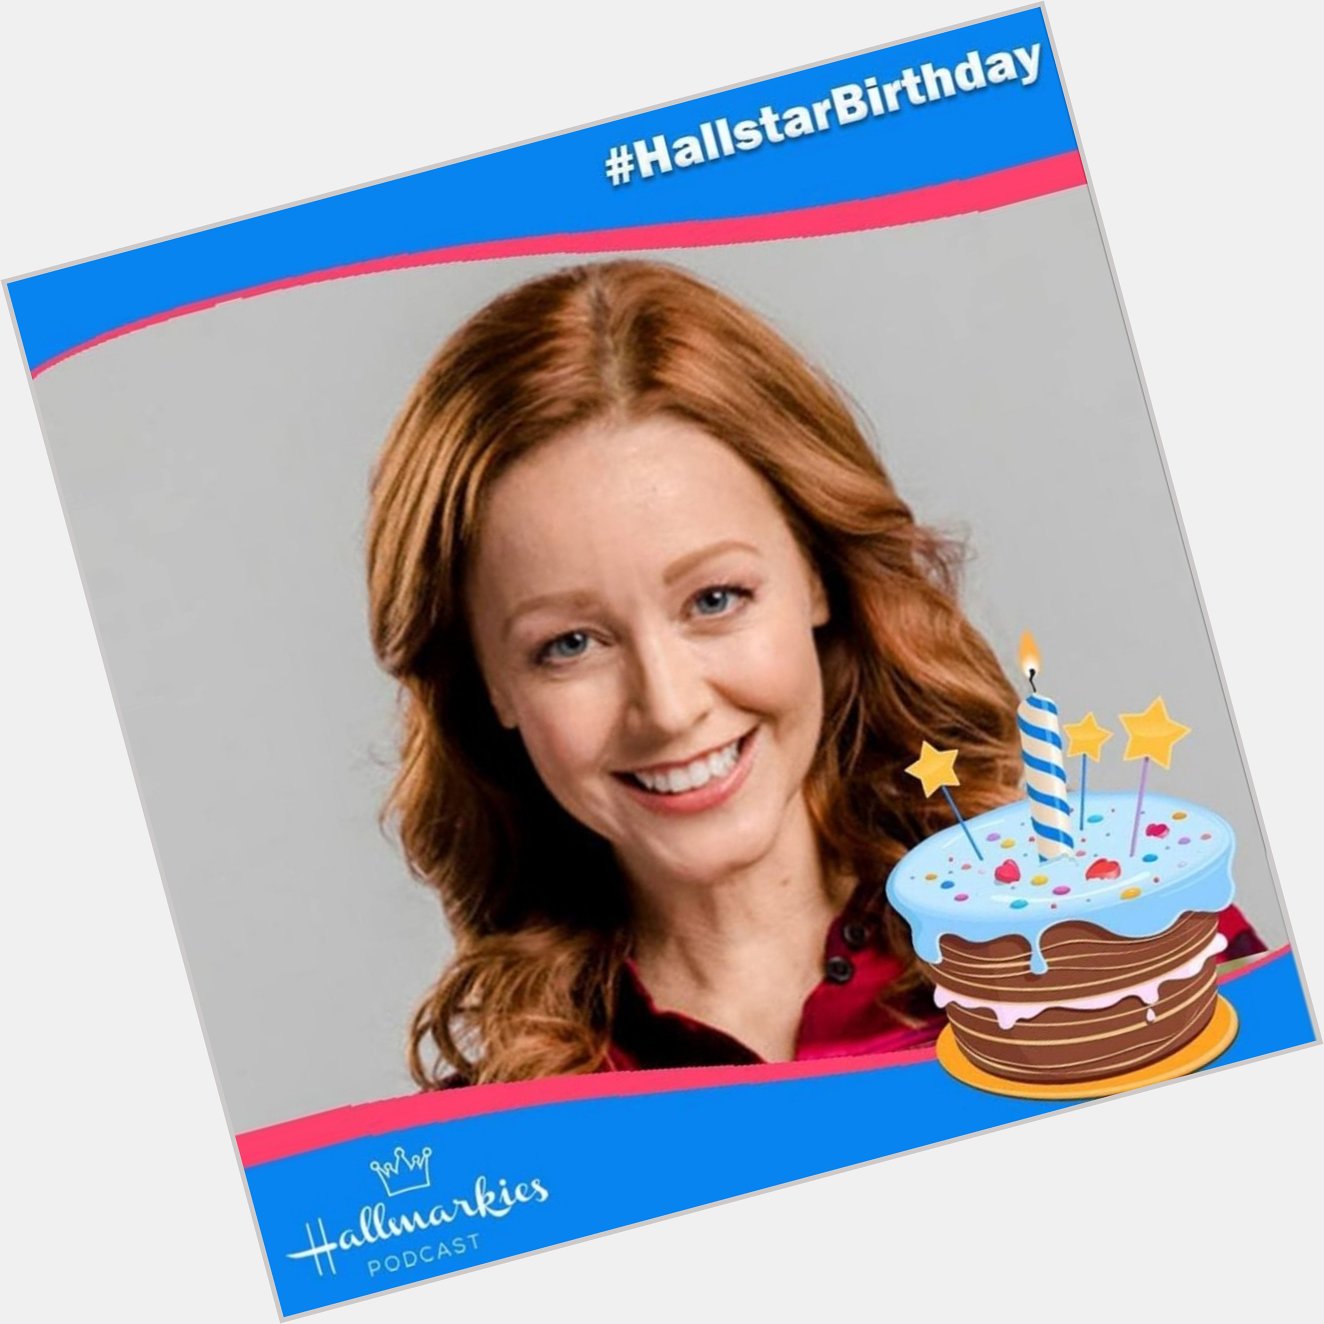 Happy Birthday to the lovely Lindy Booth   